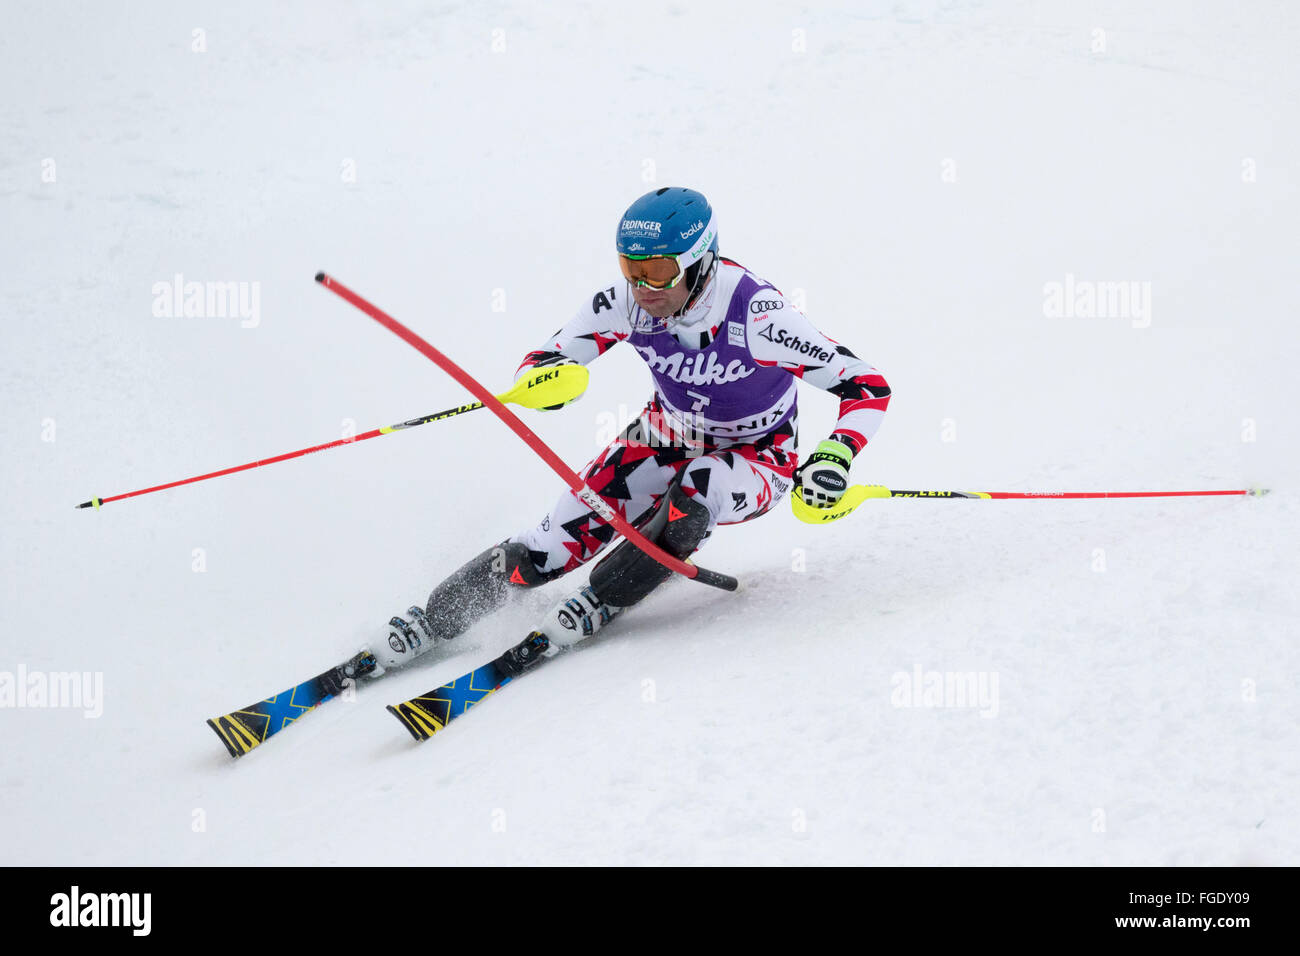 Chamonix France. 19th February, 2016. The Men's Alpine Combined event (downhill and slalom) started with the slalom section of the race instead of the downhill due to weather conditions (heavy snow) in Chamonix at 10:30h.  Christof INNERHOFER of Italy.  After the first run, French team skier Alex Pinterault leads.   After the first run the standings are  1- PINTURAULT Alexis (FRA) 42.55 2- MERMILLOD BLONDIN Thomas (FRA) 42.91 3- MUFFAT-JEANDET Victor (FRA) 42.92 Credit:  Genyphyr Novak/Alamy Live News Stock Photo